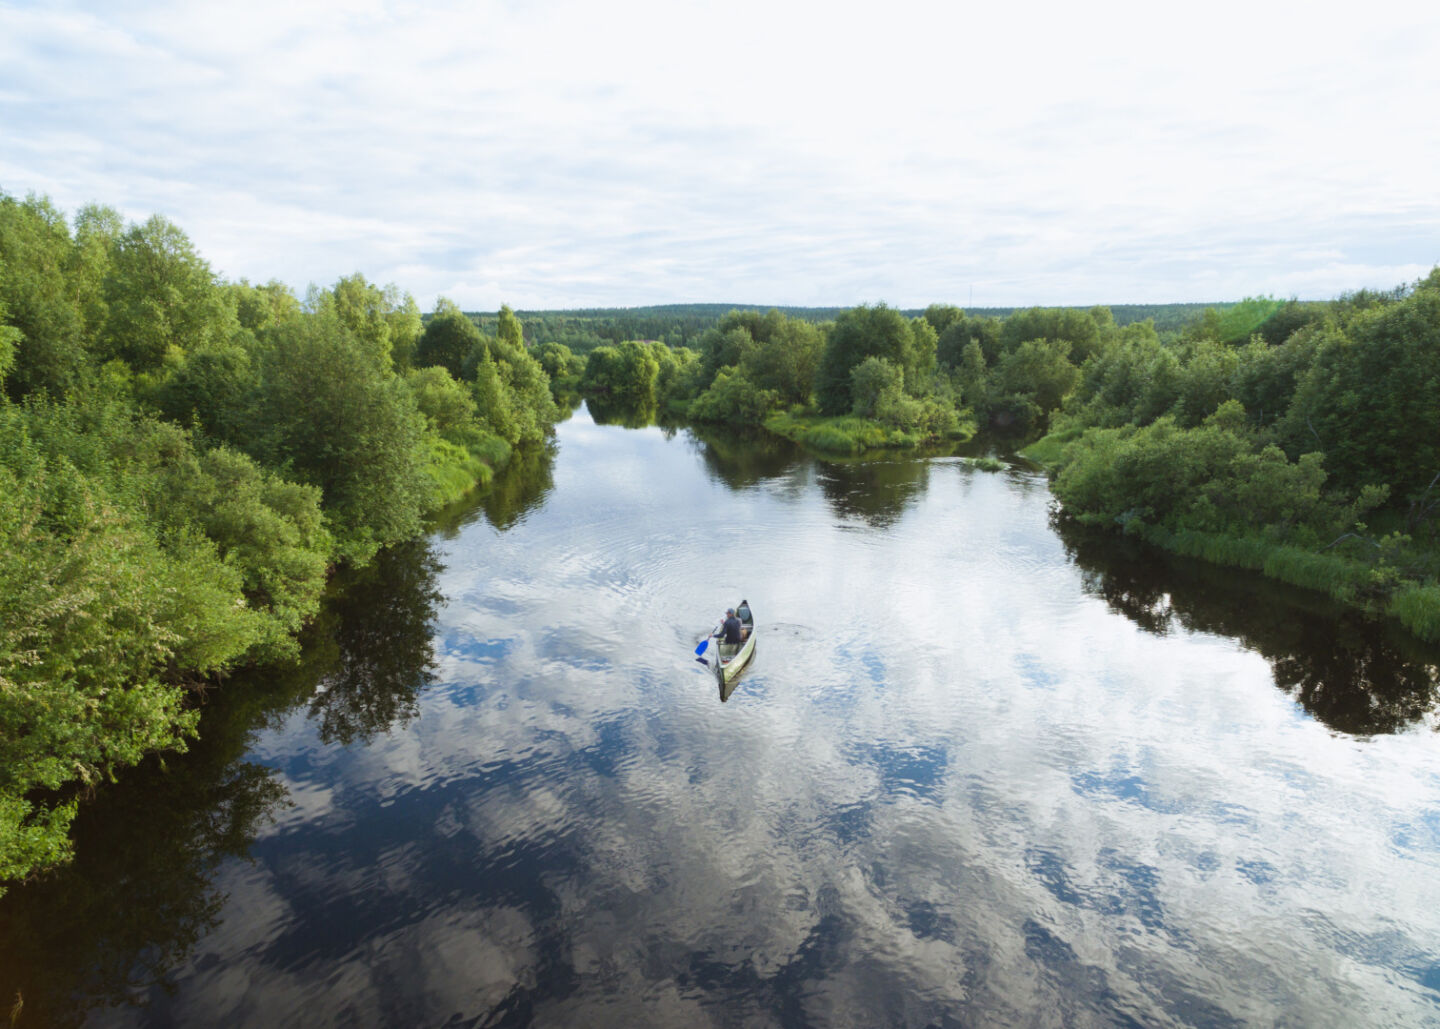 Drone shot of a canoe on the Ounasjoki river in Rovaniemi, Finland - Looking for drone rules, laws & regulations for Finland?